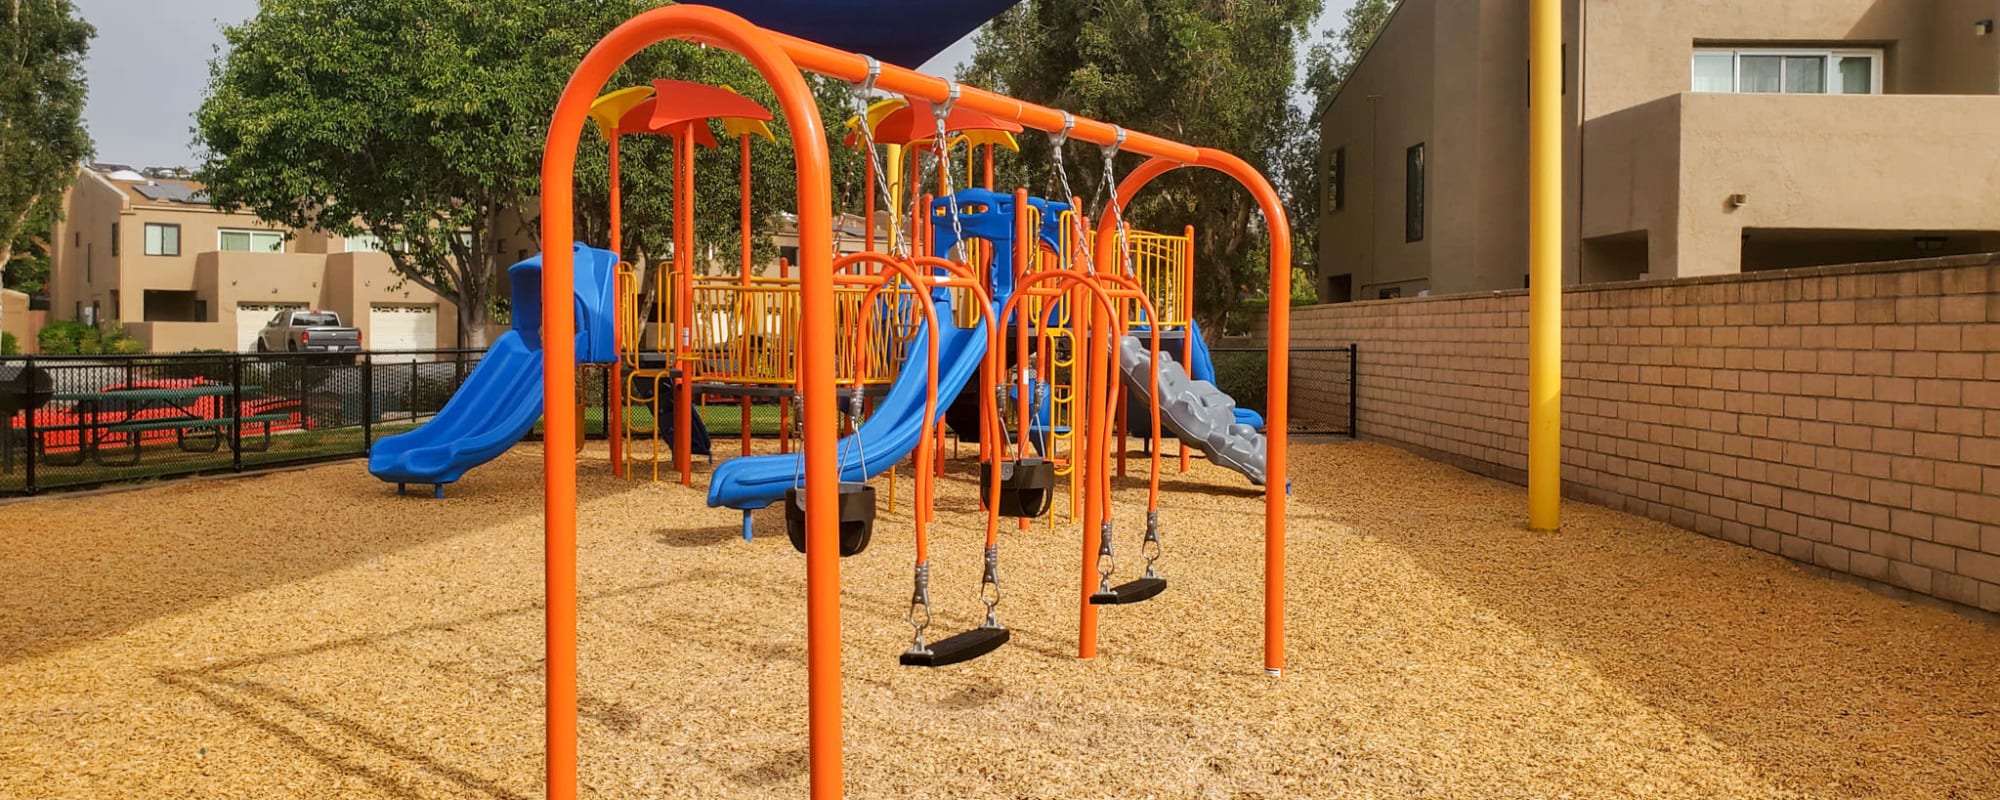 A covered playground at Hilleary Park in San Diego, California